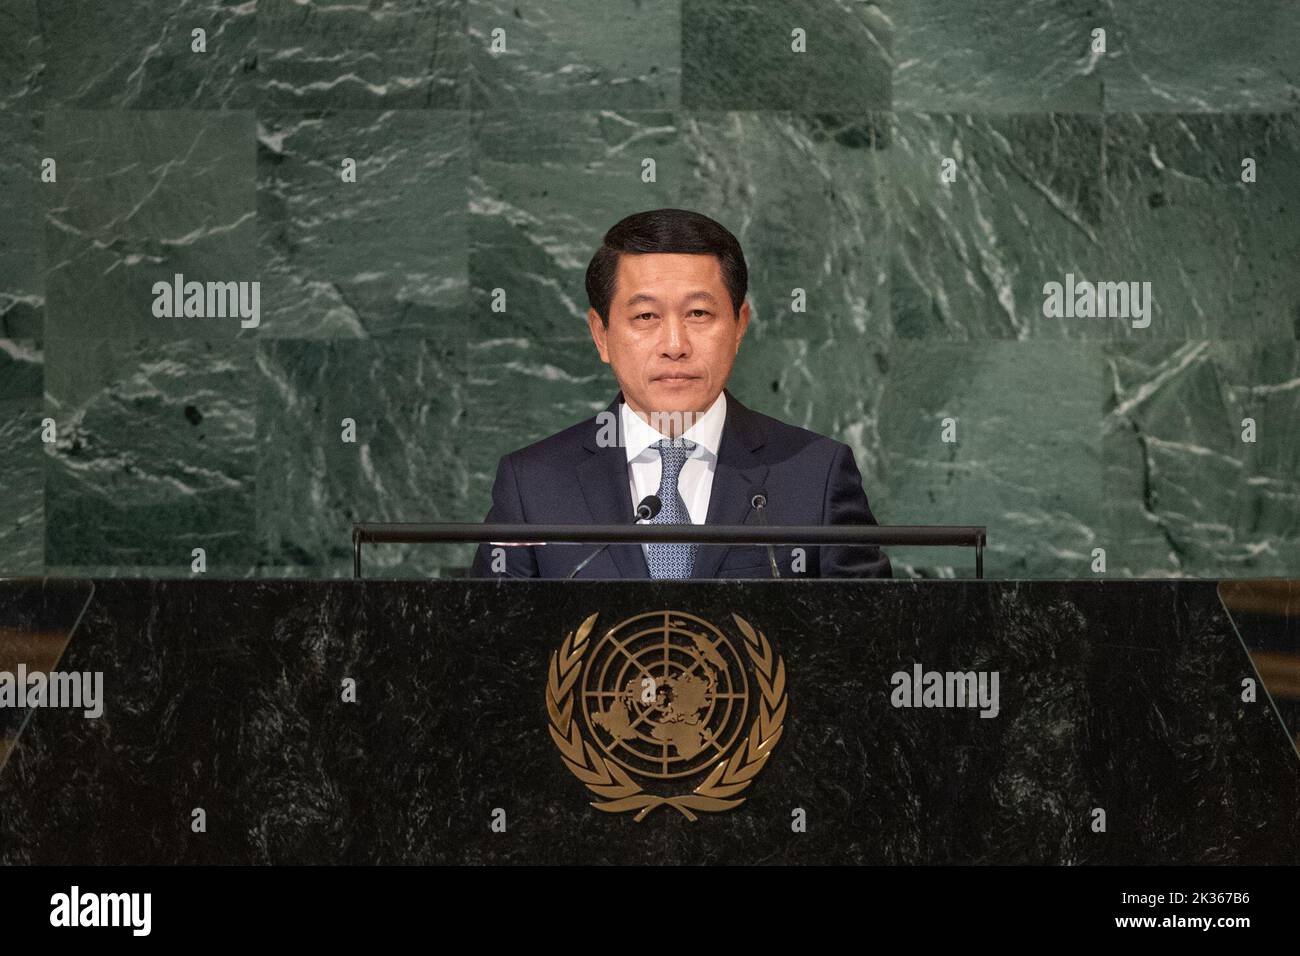 (220925) -- UNITED NATIONS, Sept. 25, 2022 (Xinhua) -- Lao Deputy Prime Minister and Foreign Minister Saleumxay Kommasith speaks during the General Debate of the 77th session of the UN General Assembly at the UN headquarters in New York, on Sept. 24, 2022. TO GO WITH 'Lao deputy PM calls for practical solutions to global problems through multilateralism' (Cia Pak/UN Photo/Handout via Xinhua) Stock Photo